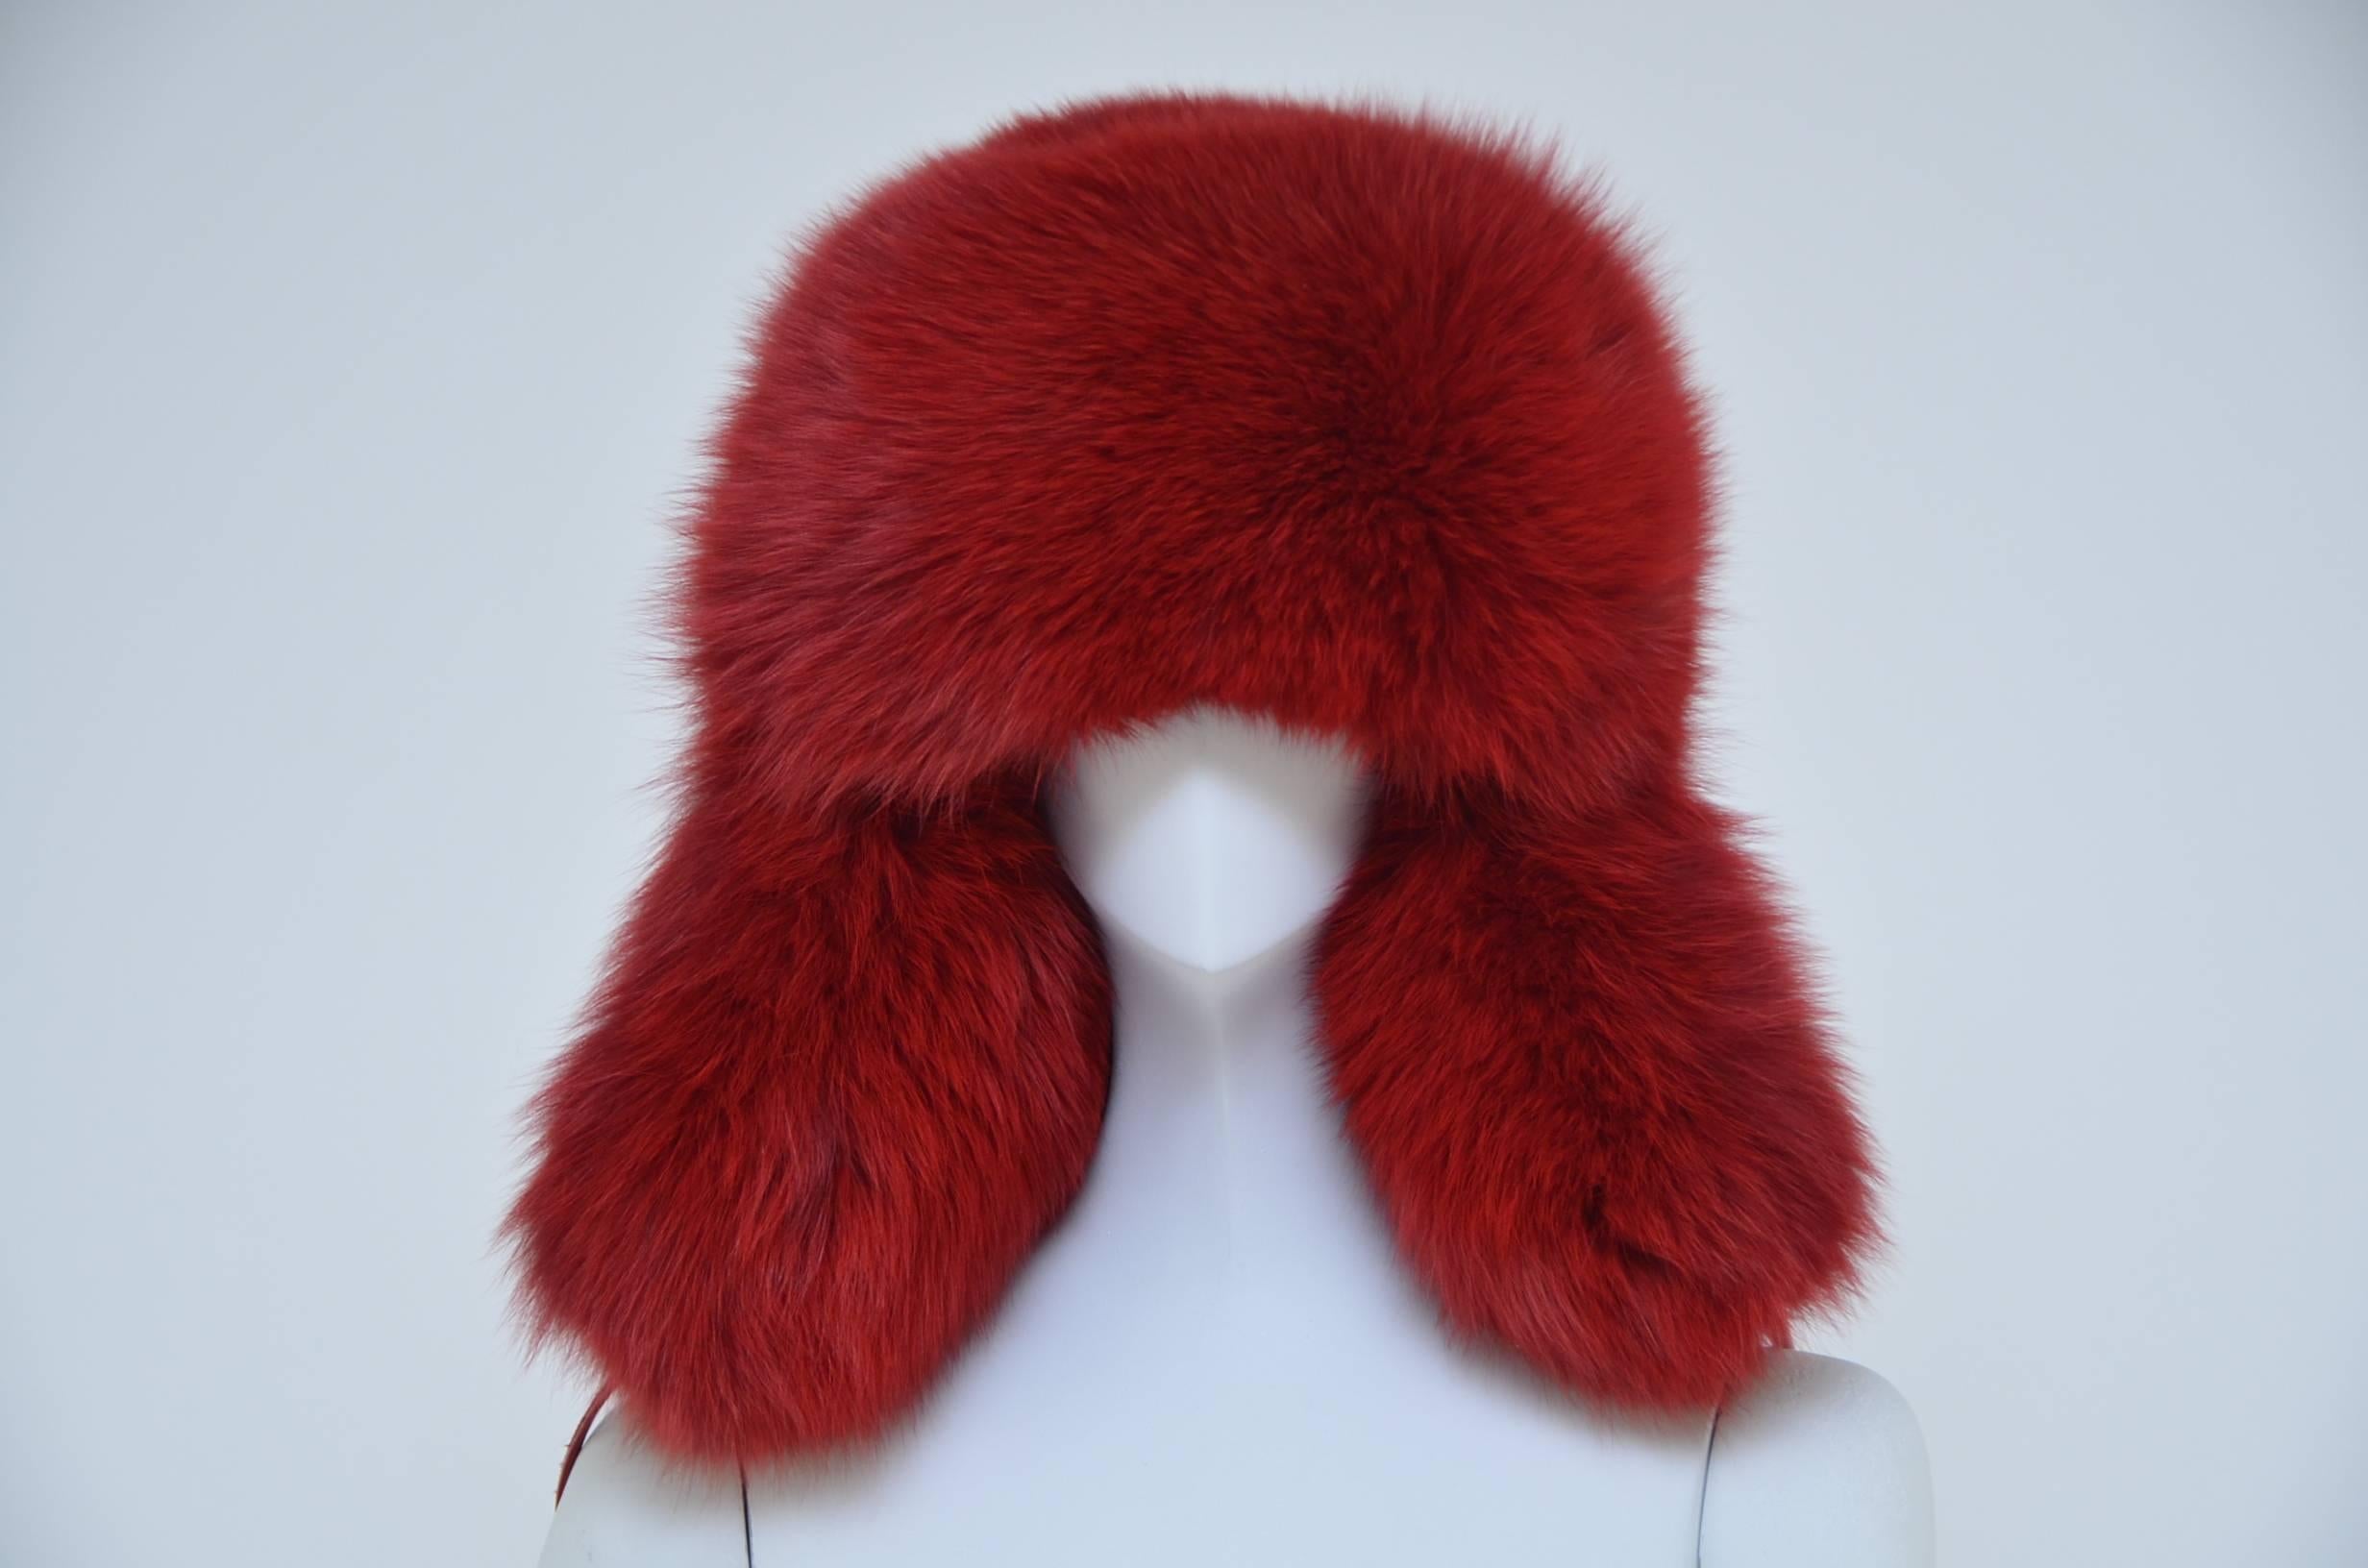 Marc Jacobs fox fur hat .
New with tags attached.Tie closure in the front.
Same hat (model) was  seen  on  Lil Wayne who  wore it in his music video.
FINAL SALE.